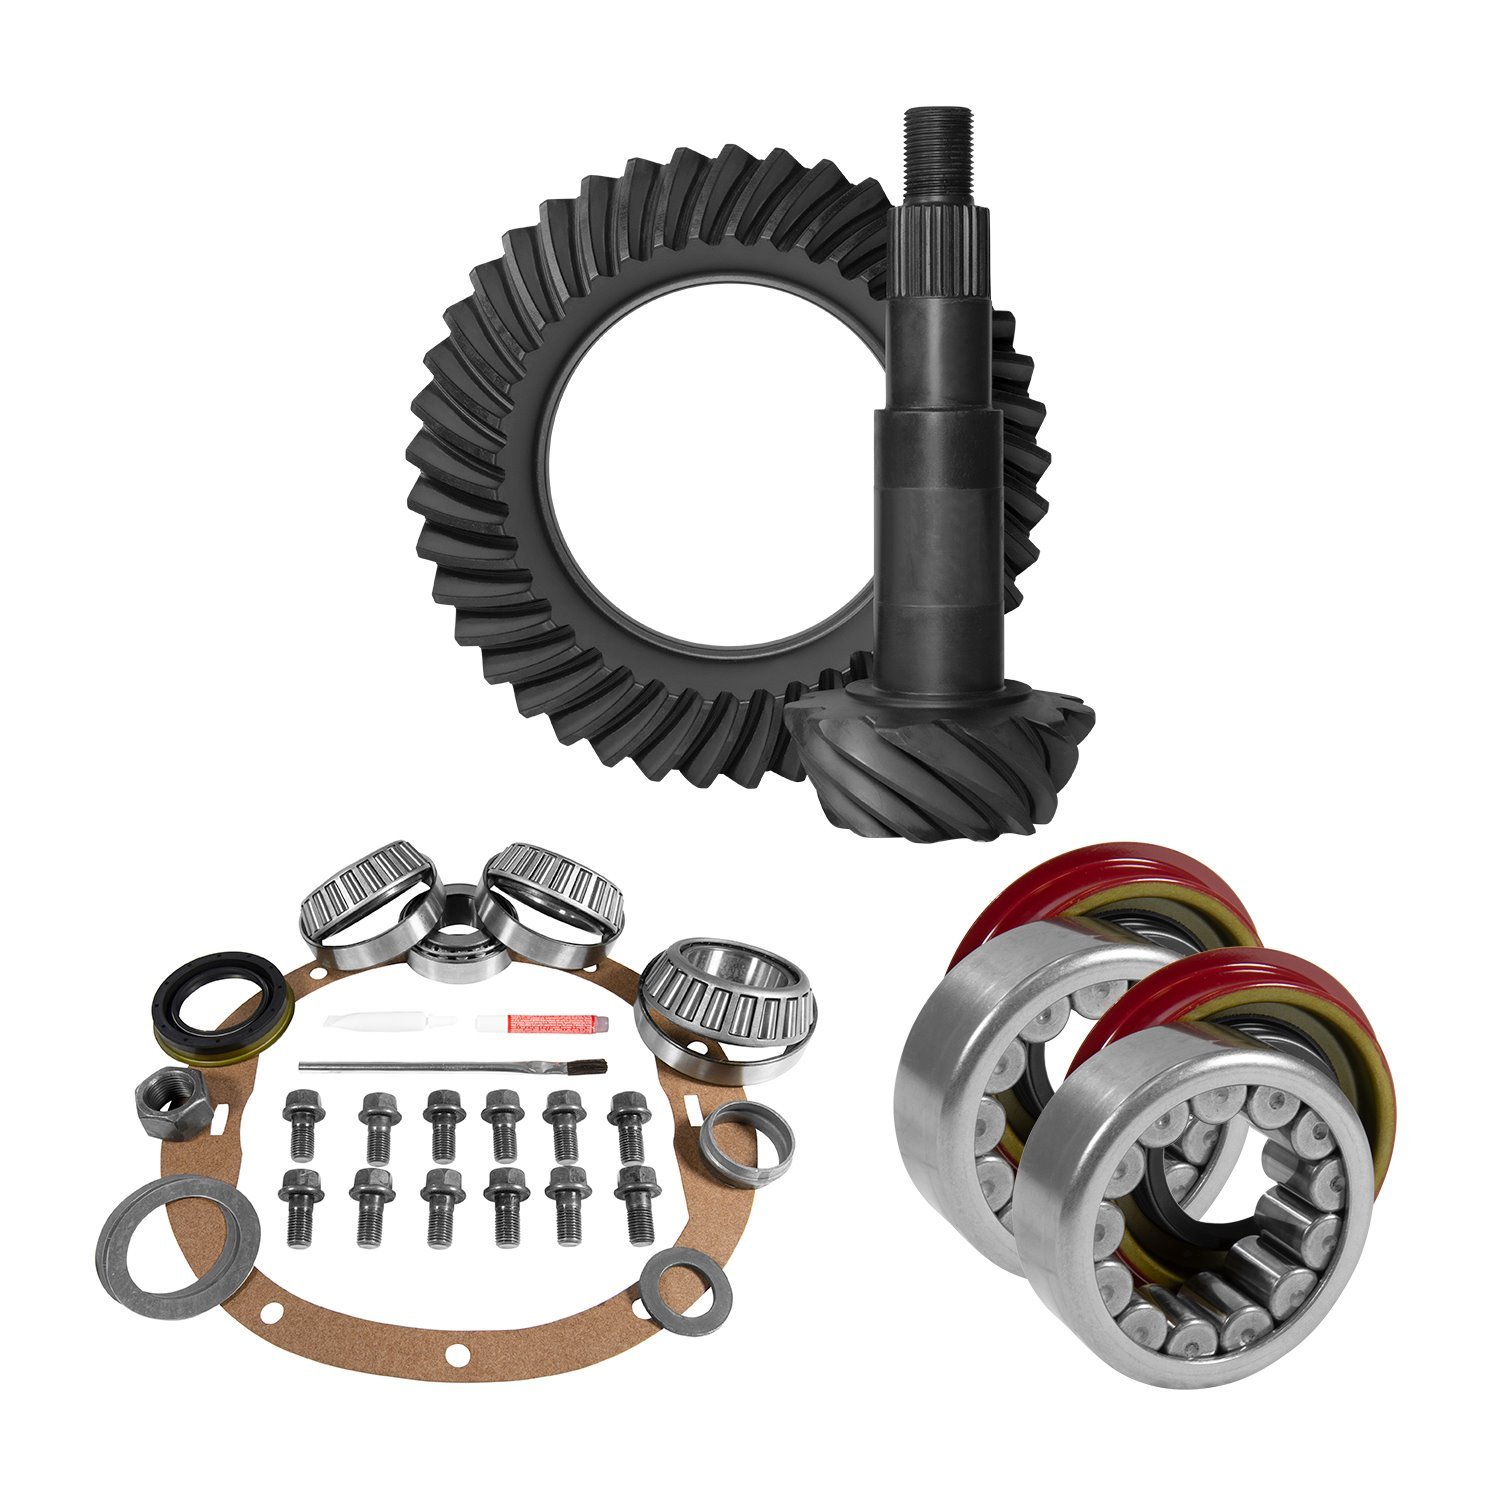 USA Standard 10717 8.5 in. GM 3.42 Rear Ring & Pinion Install Kit, Axle Bearings, 1.78 in. Case Journal